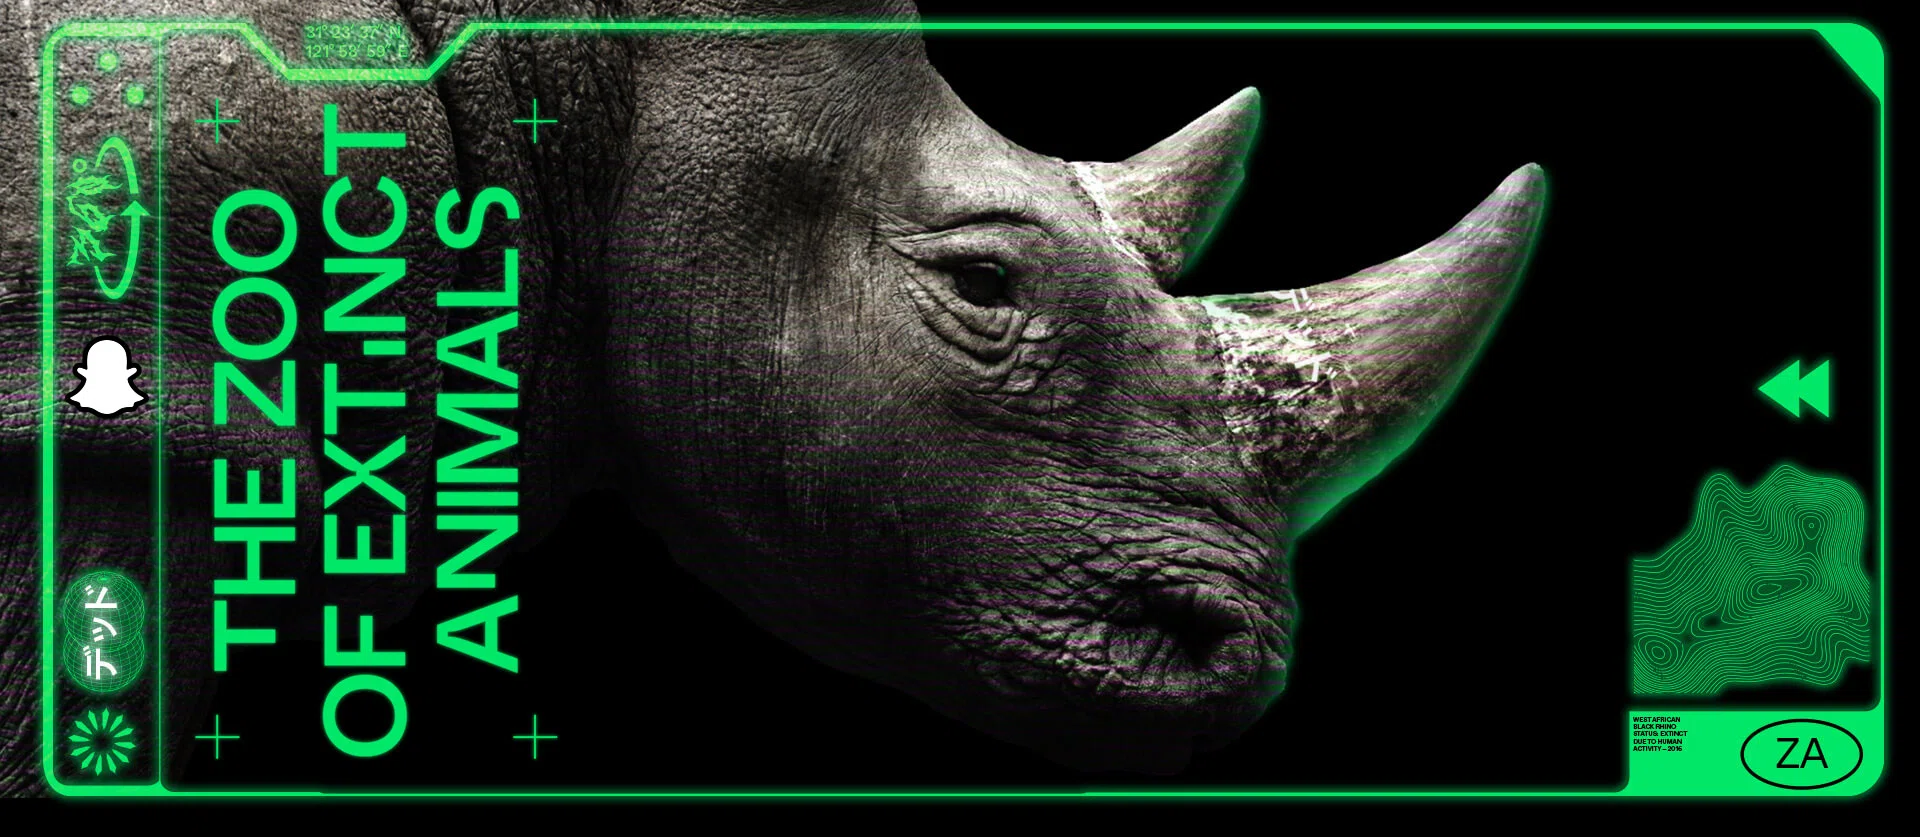 The Zoo of Extinct Animals is an AR experience allowing viewers to interact  with extinct wildlife